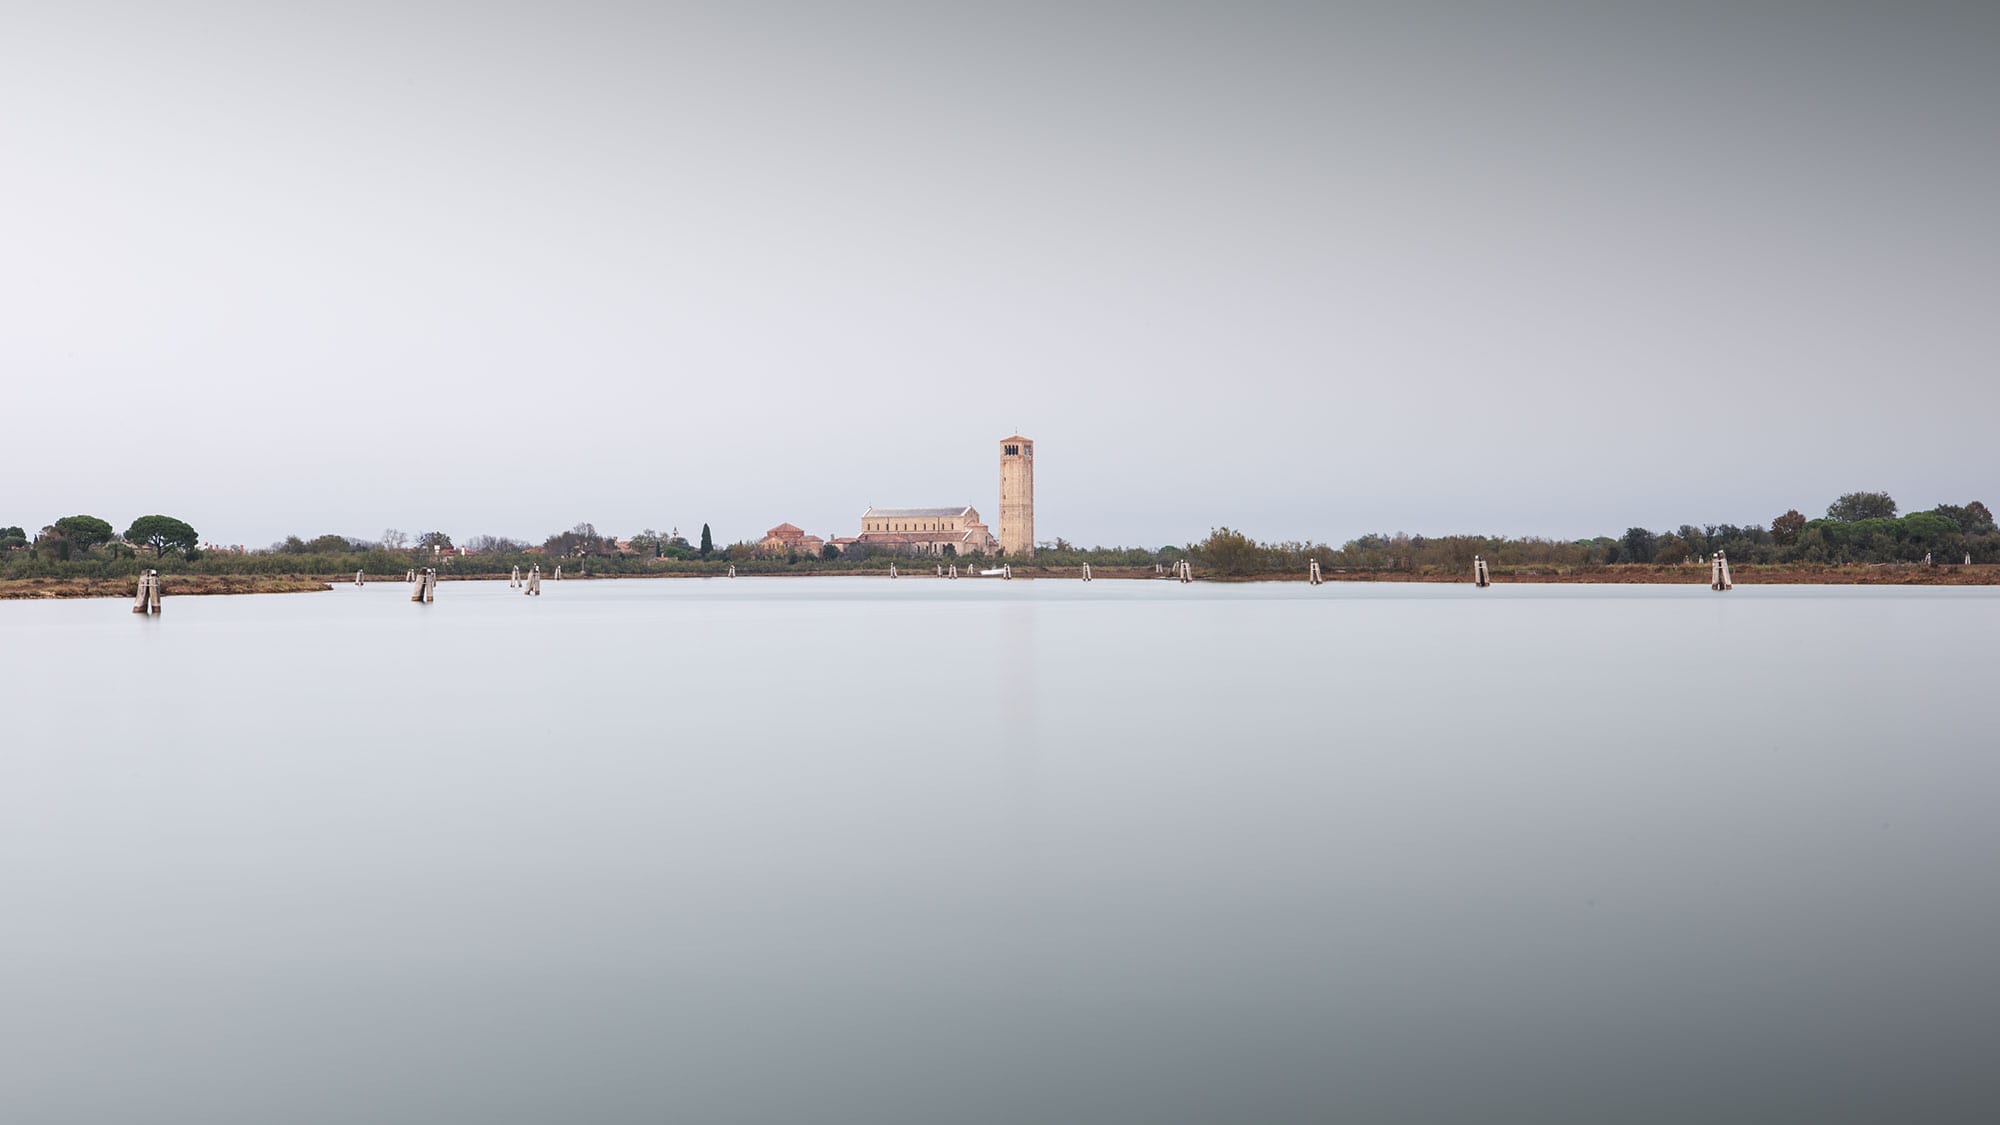 Minimalist landscape photography capturing a long exposure seascape of Torcello, an island near Venice, Italy.